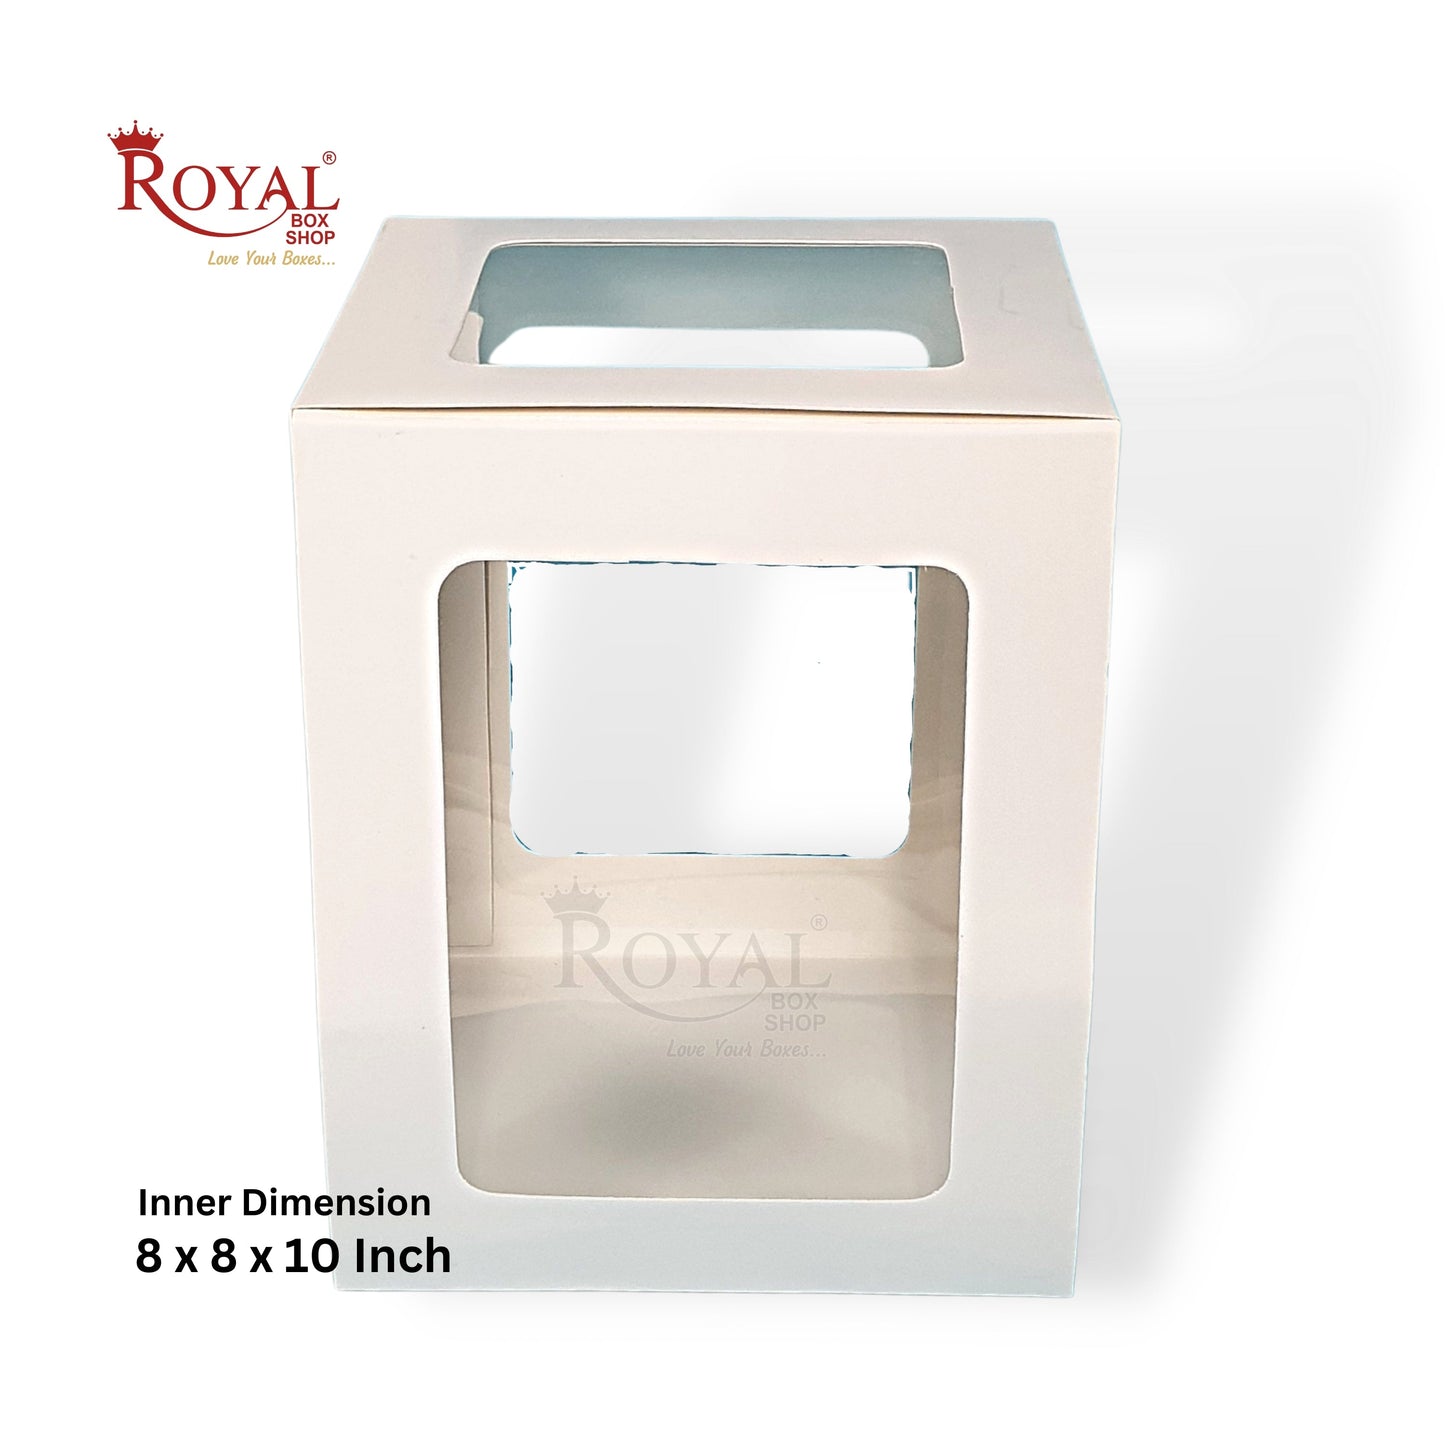 RoyalBoxShop® 5-Window Gift Box I 8x8x10 Inch I White I Perfect for Bakery Cakes, Gifts, Parties, Any Occasion Royal Box Shop